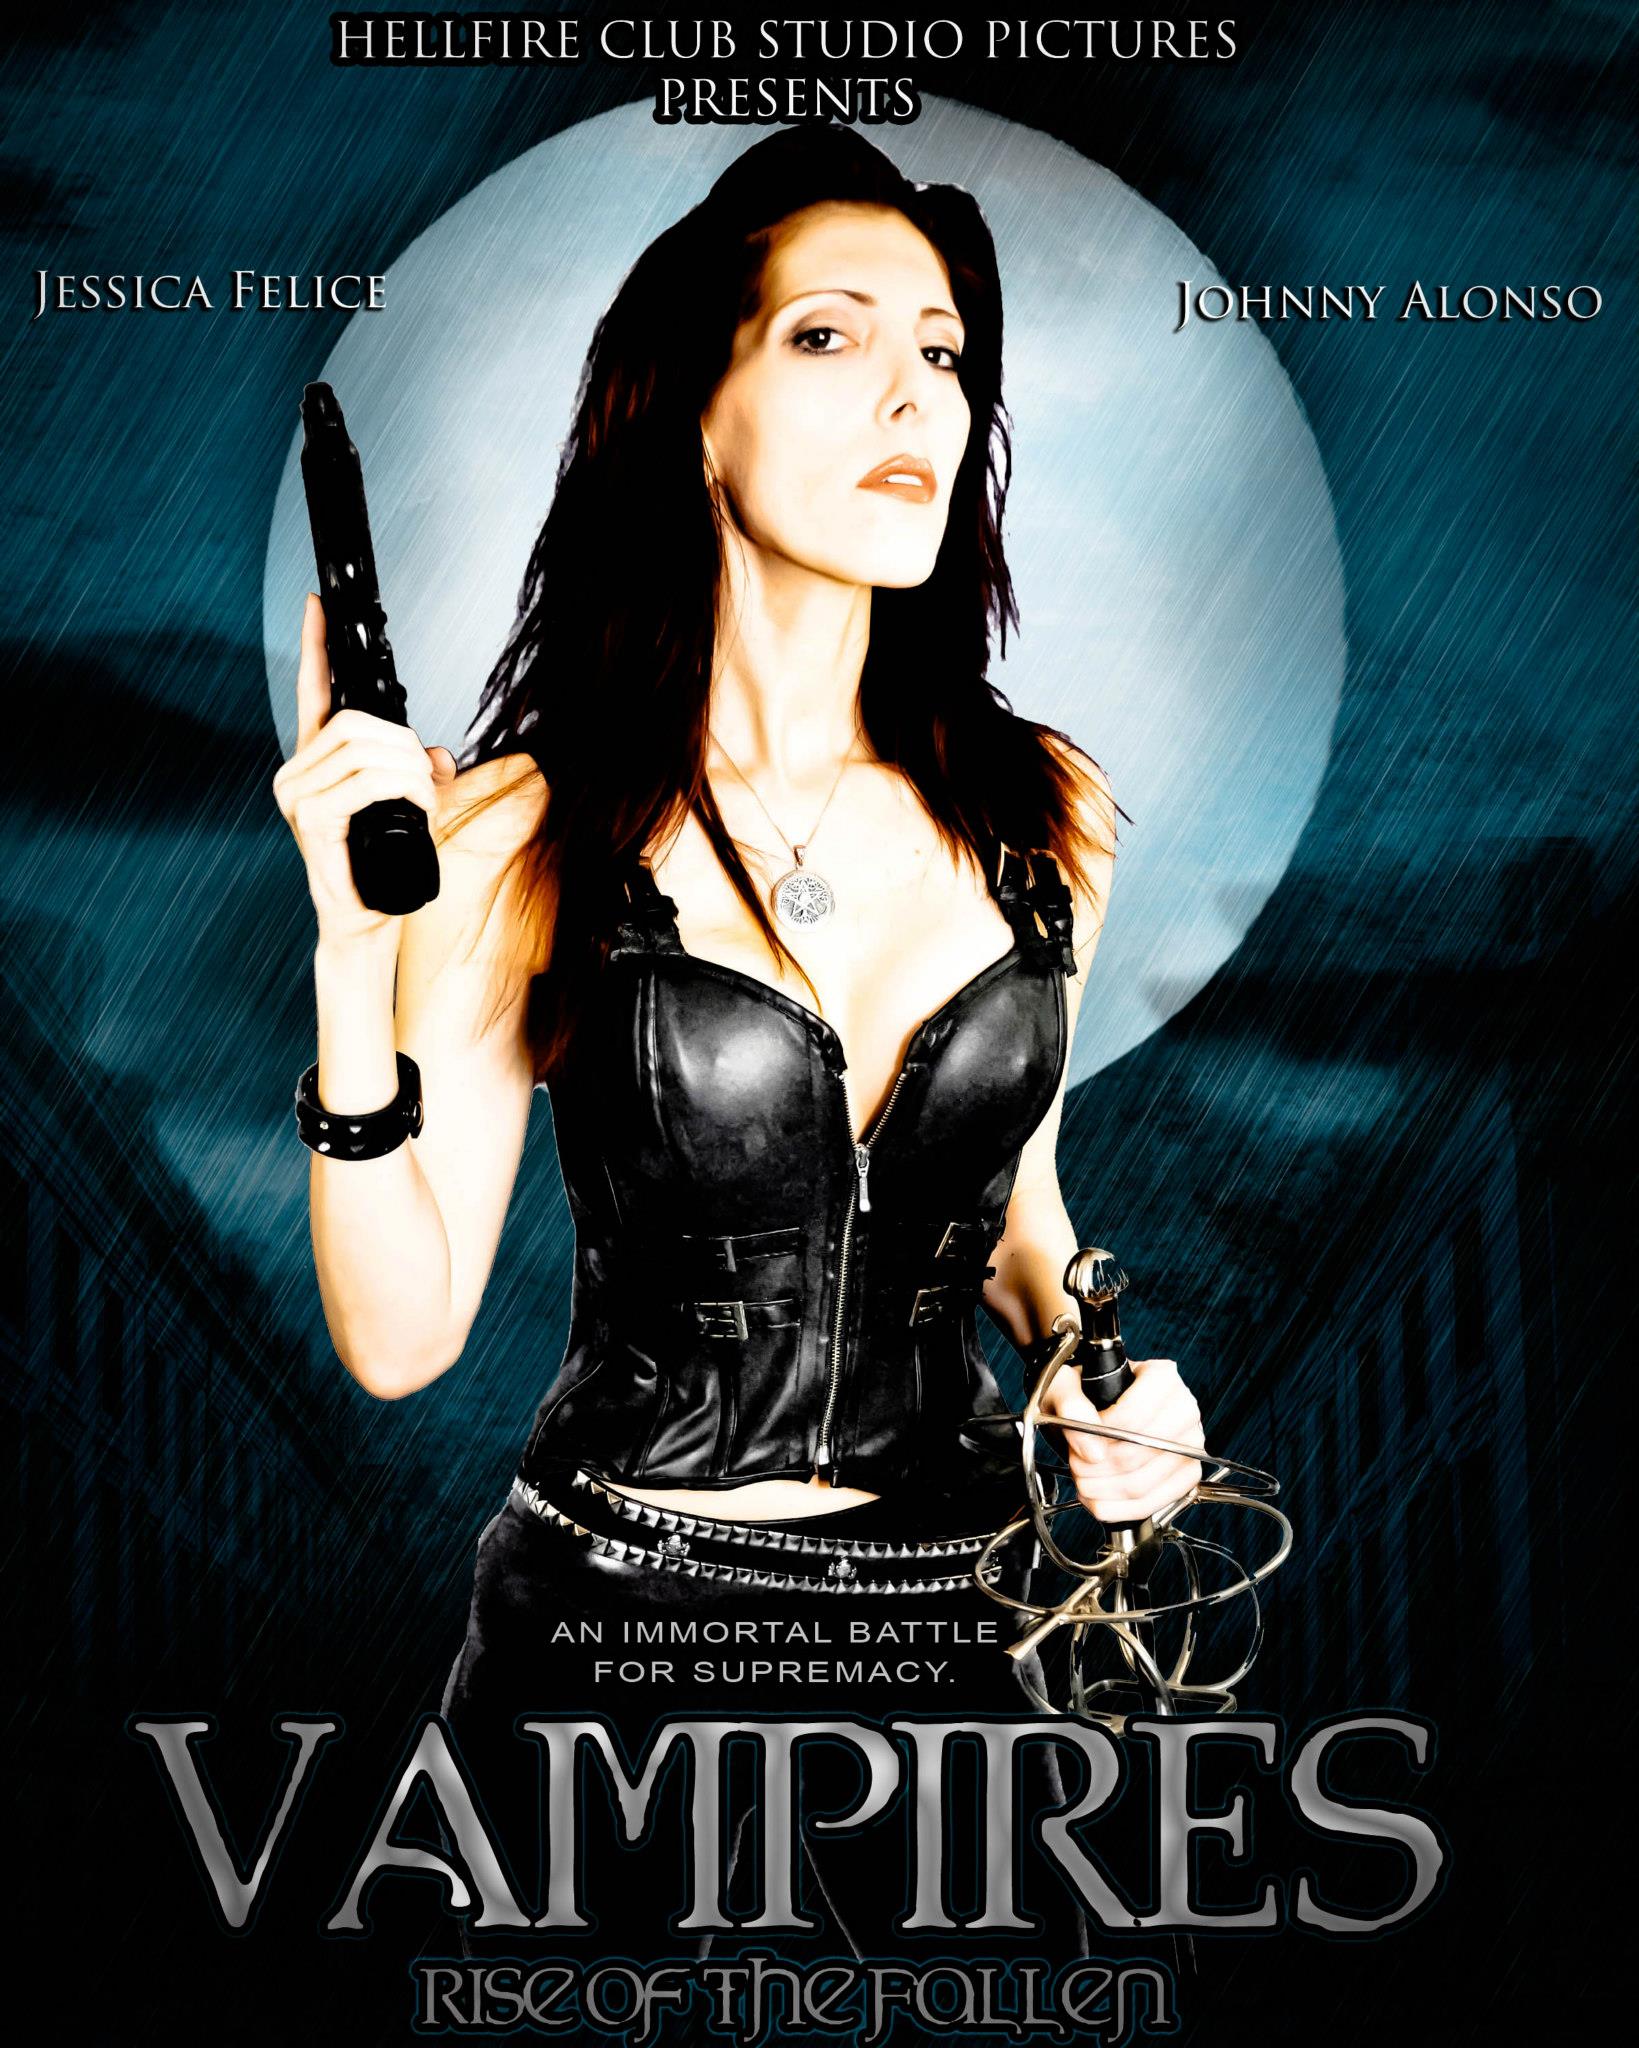 Vampires Rise of the Fallen Written and Directed by Shawn Anthony